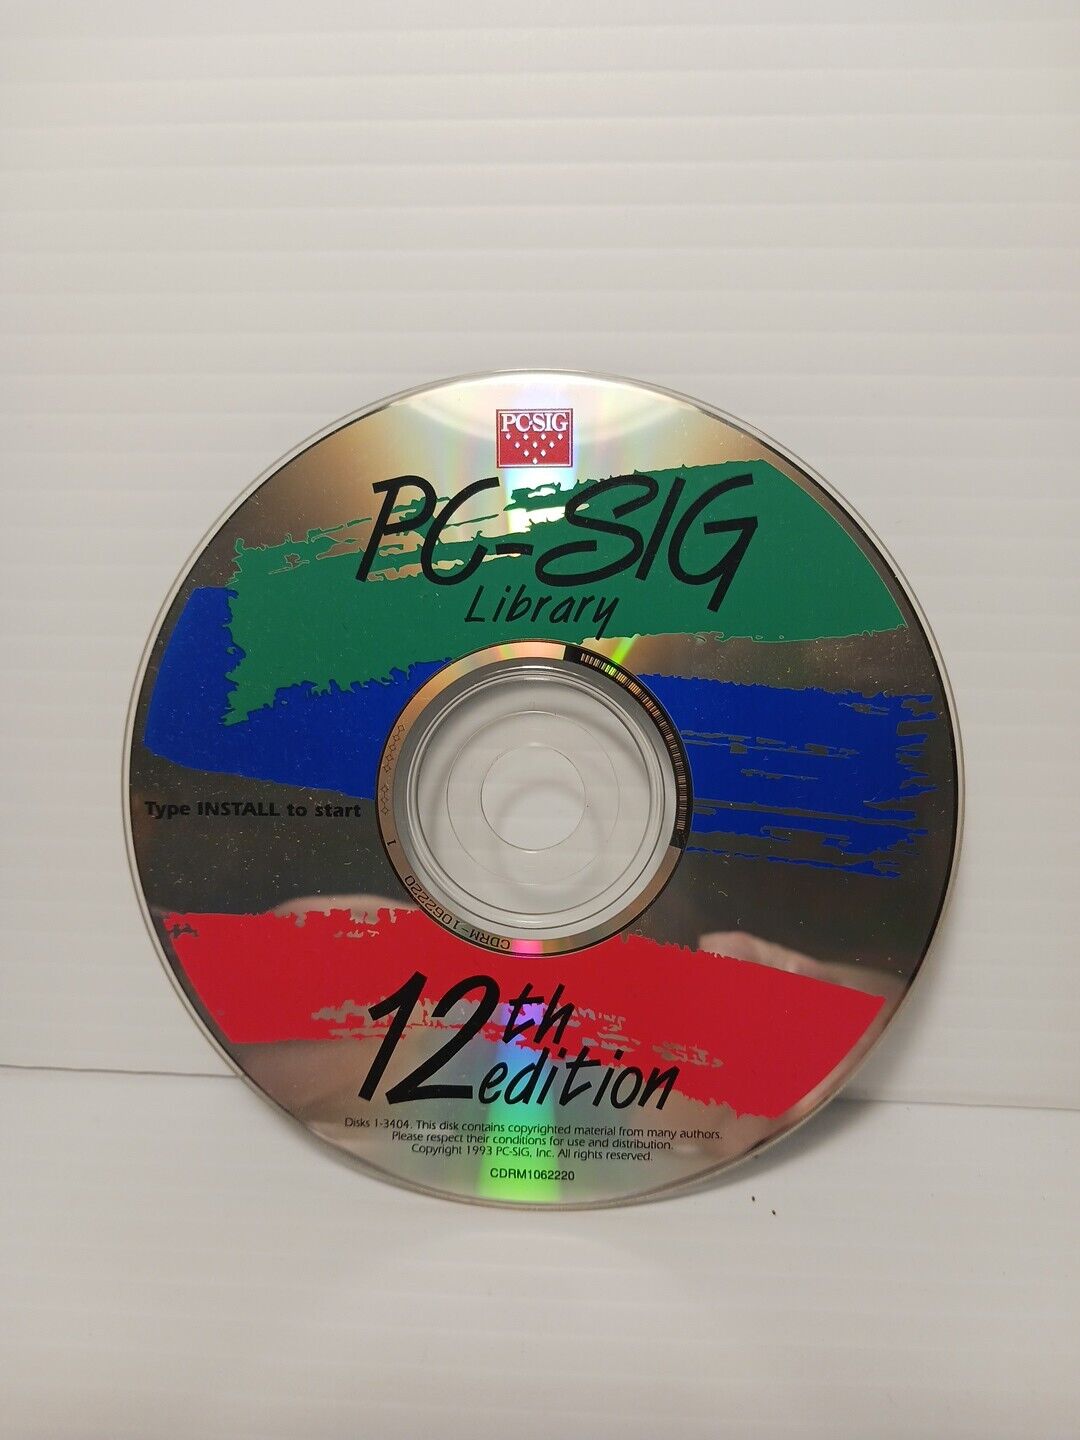 PC-SIG LIBRARY 12th Edition Vintage 1993 Computer Software Disc Only 